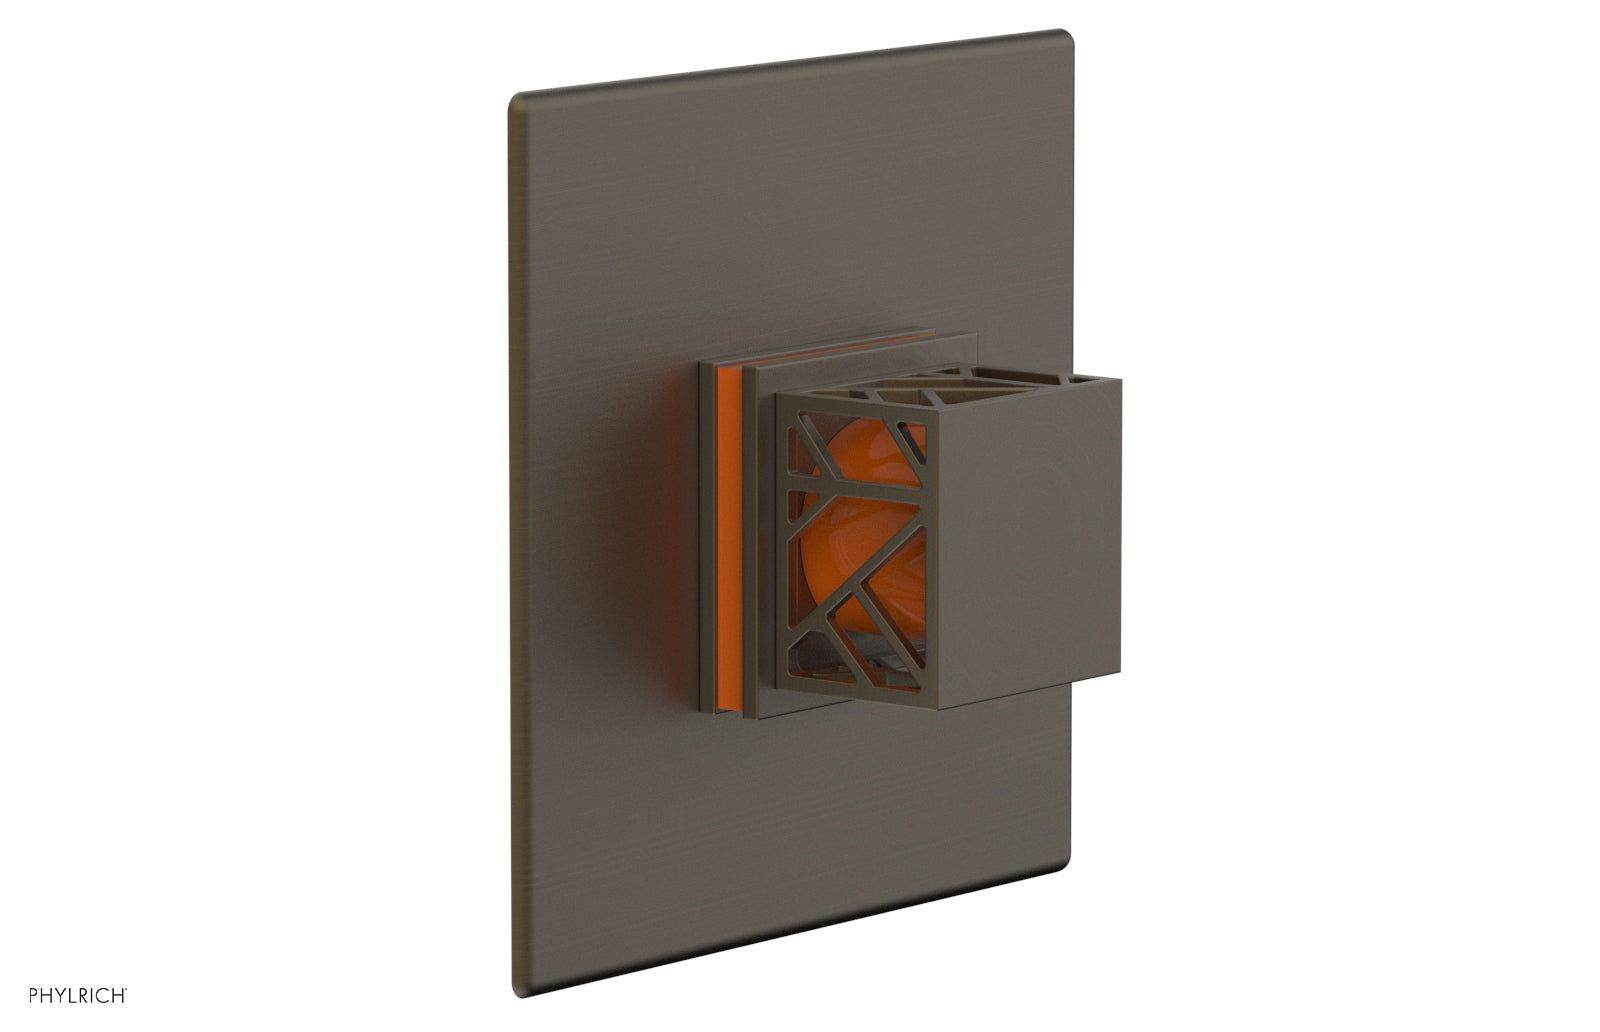 Phylrich JOLIE Pressure Balance Shower Plate & Handle Trim, Square Handle with "Orange" Accents